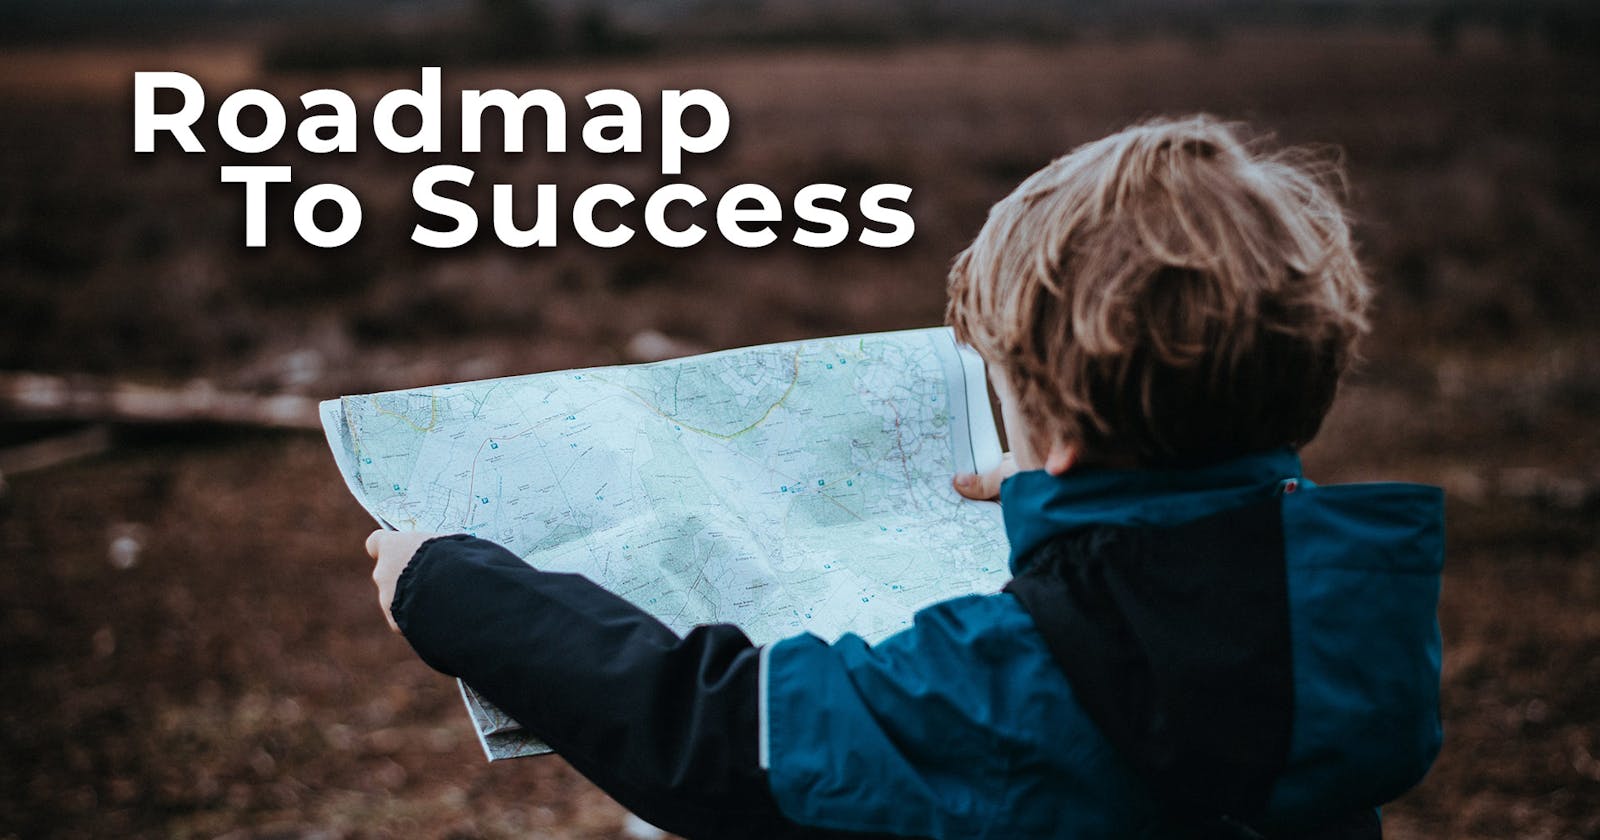 Roadmap to Success: 3 lessons I learned from 61 of the most influential JavaScript developers